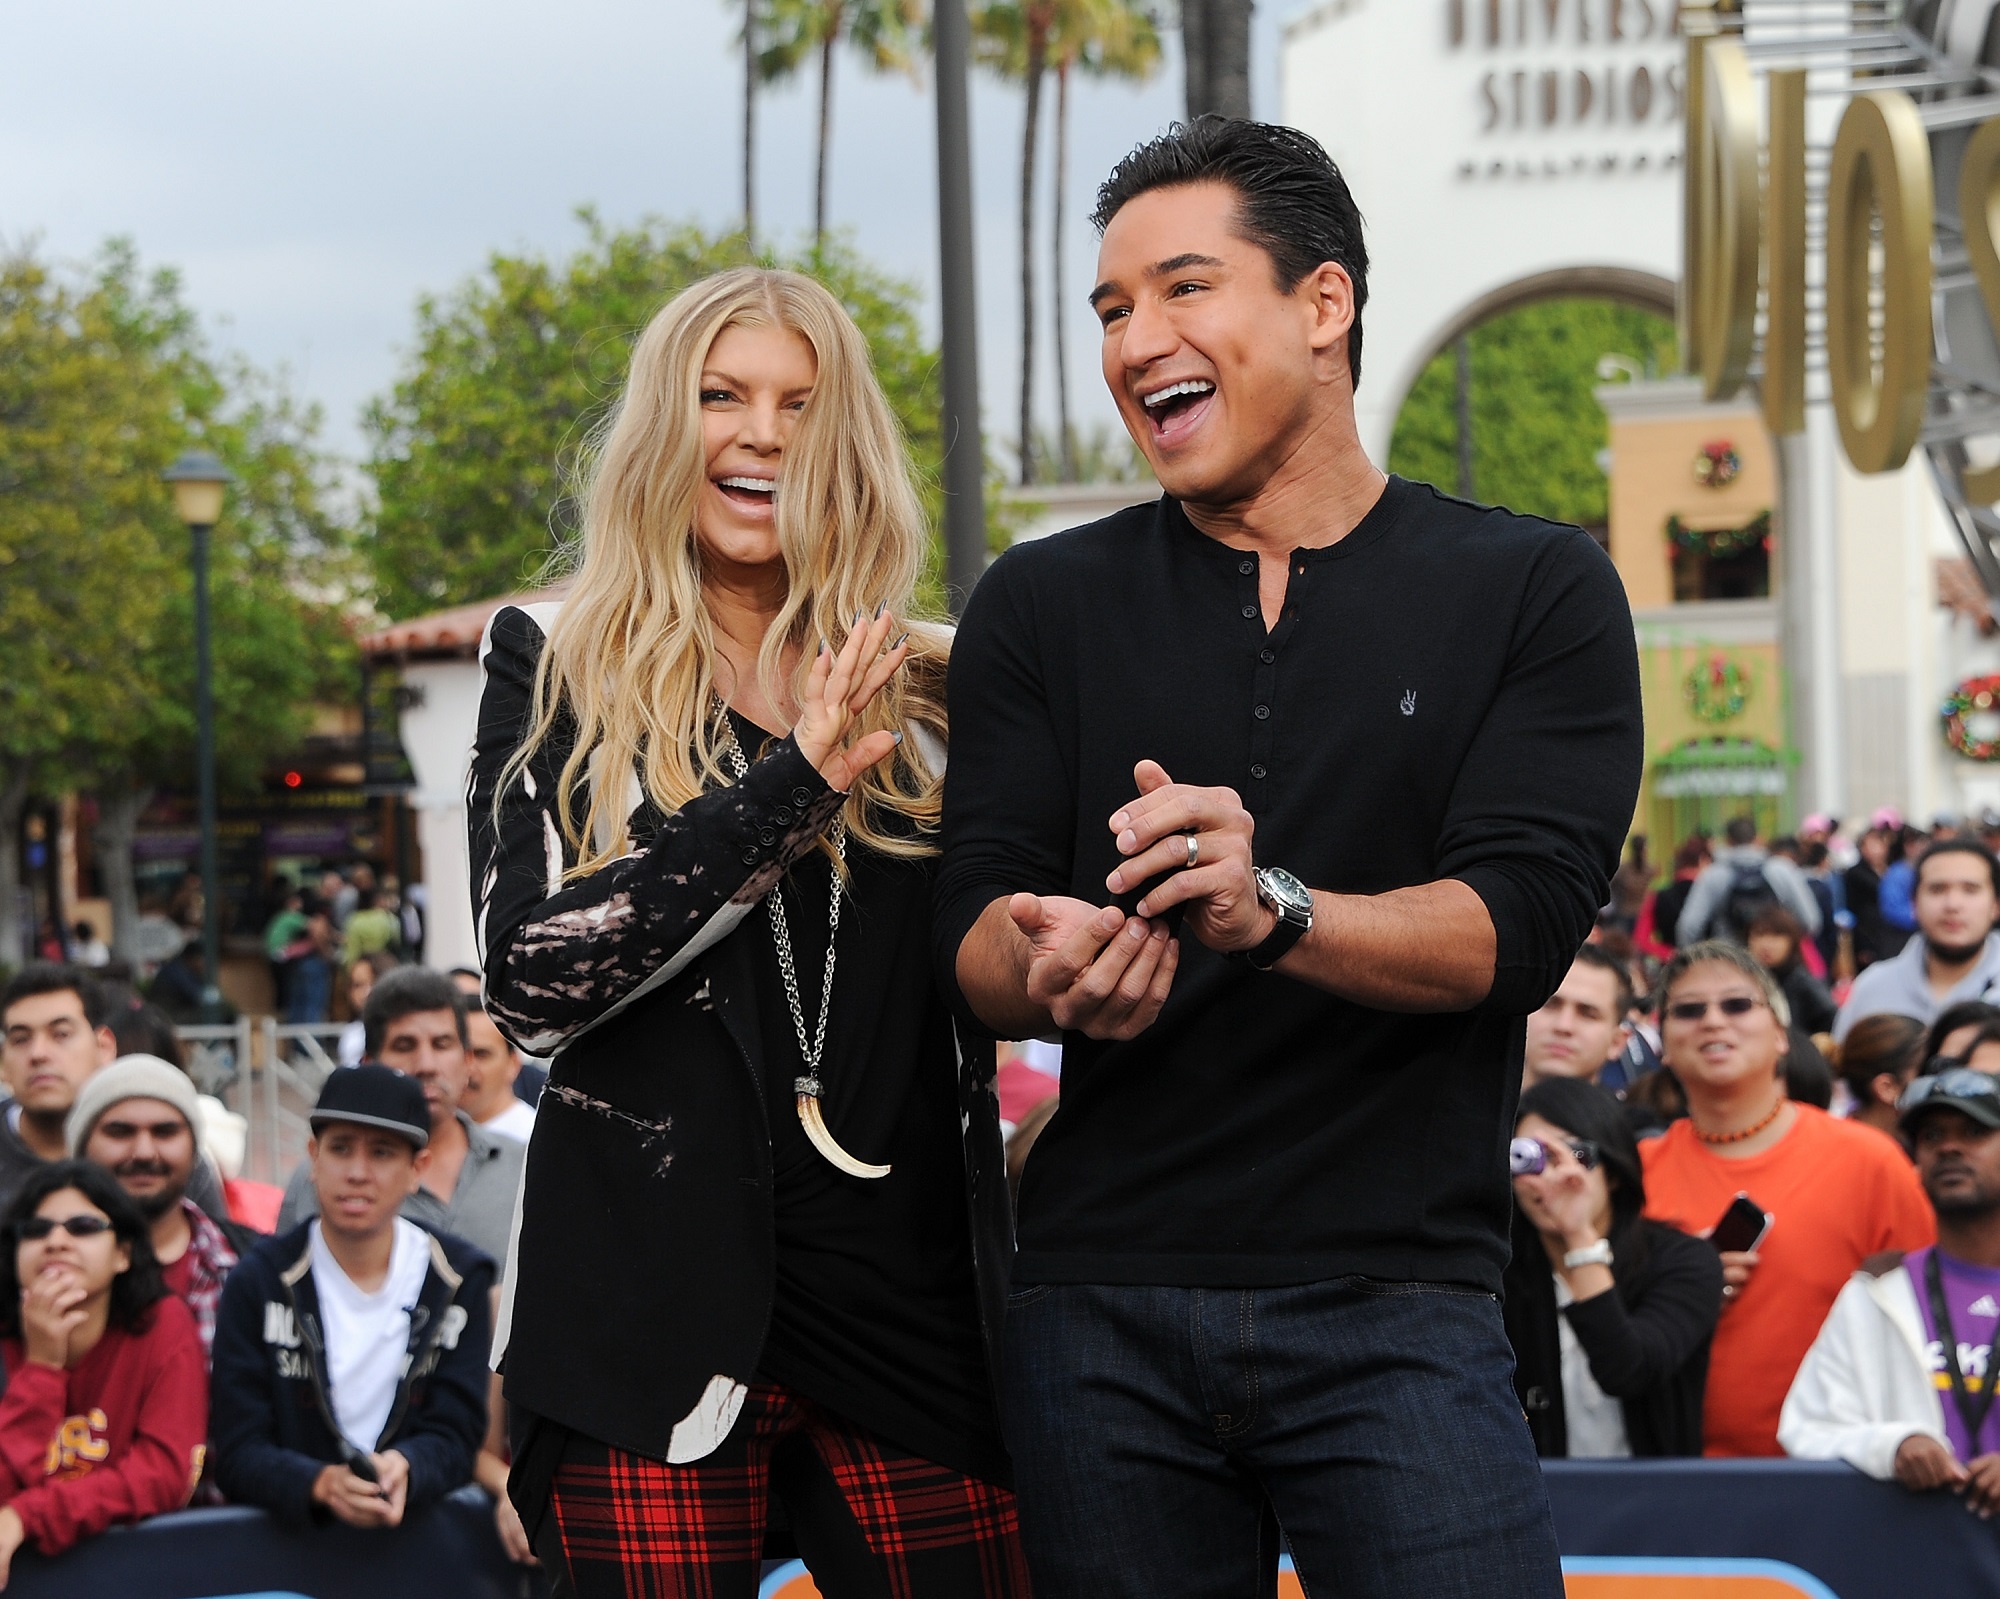 Fergie (L) and Mario Lopez visit 'Extra' at Universal Studios Hollywood on November 20, 2013, in Los Angeles, California.